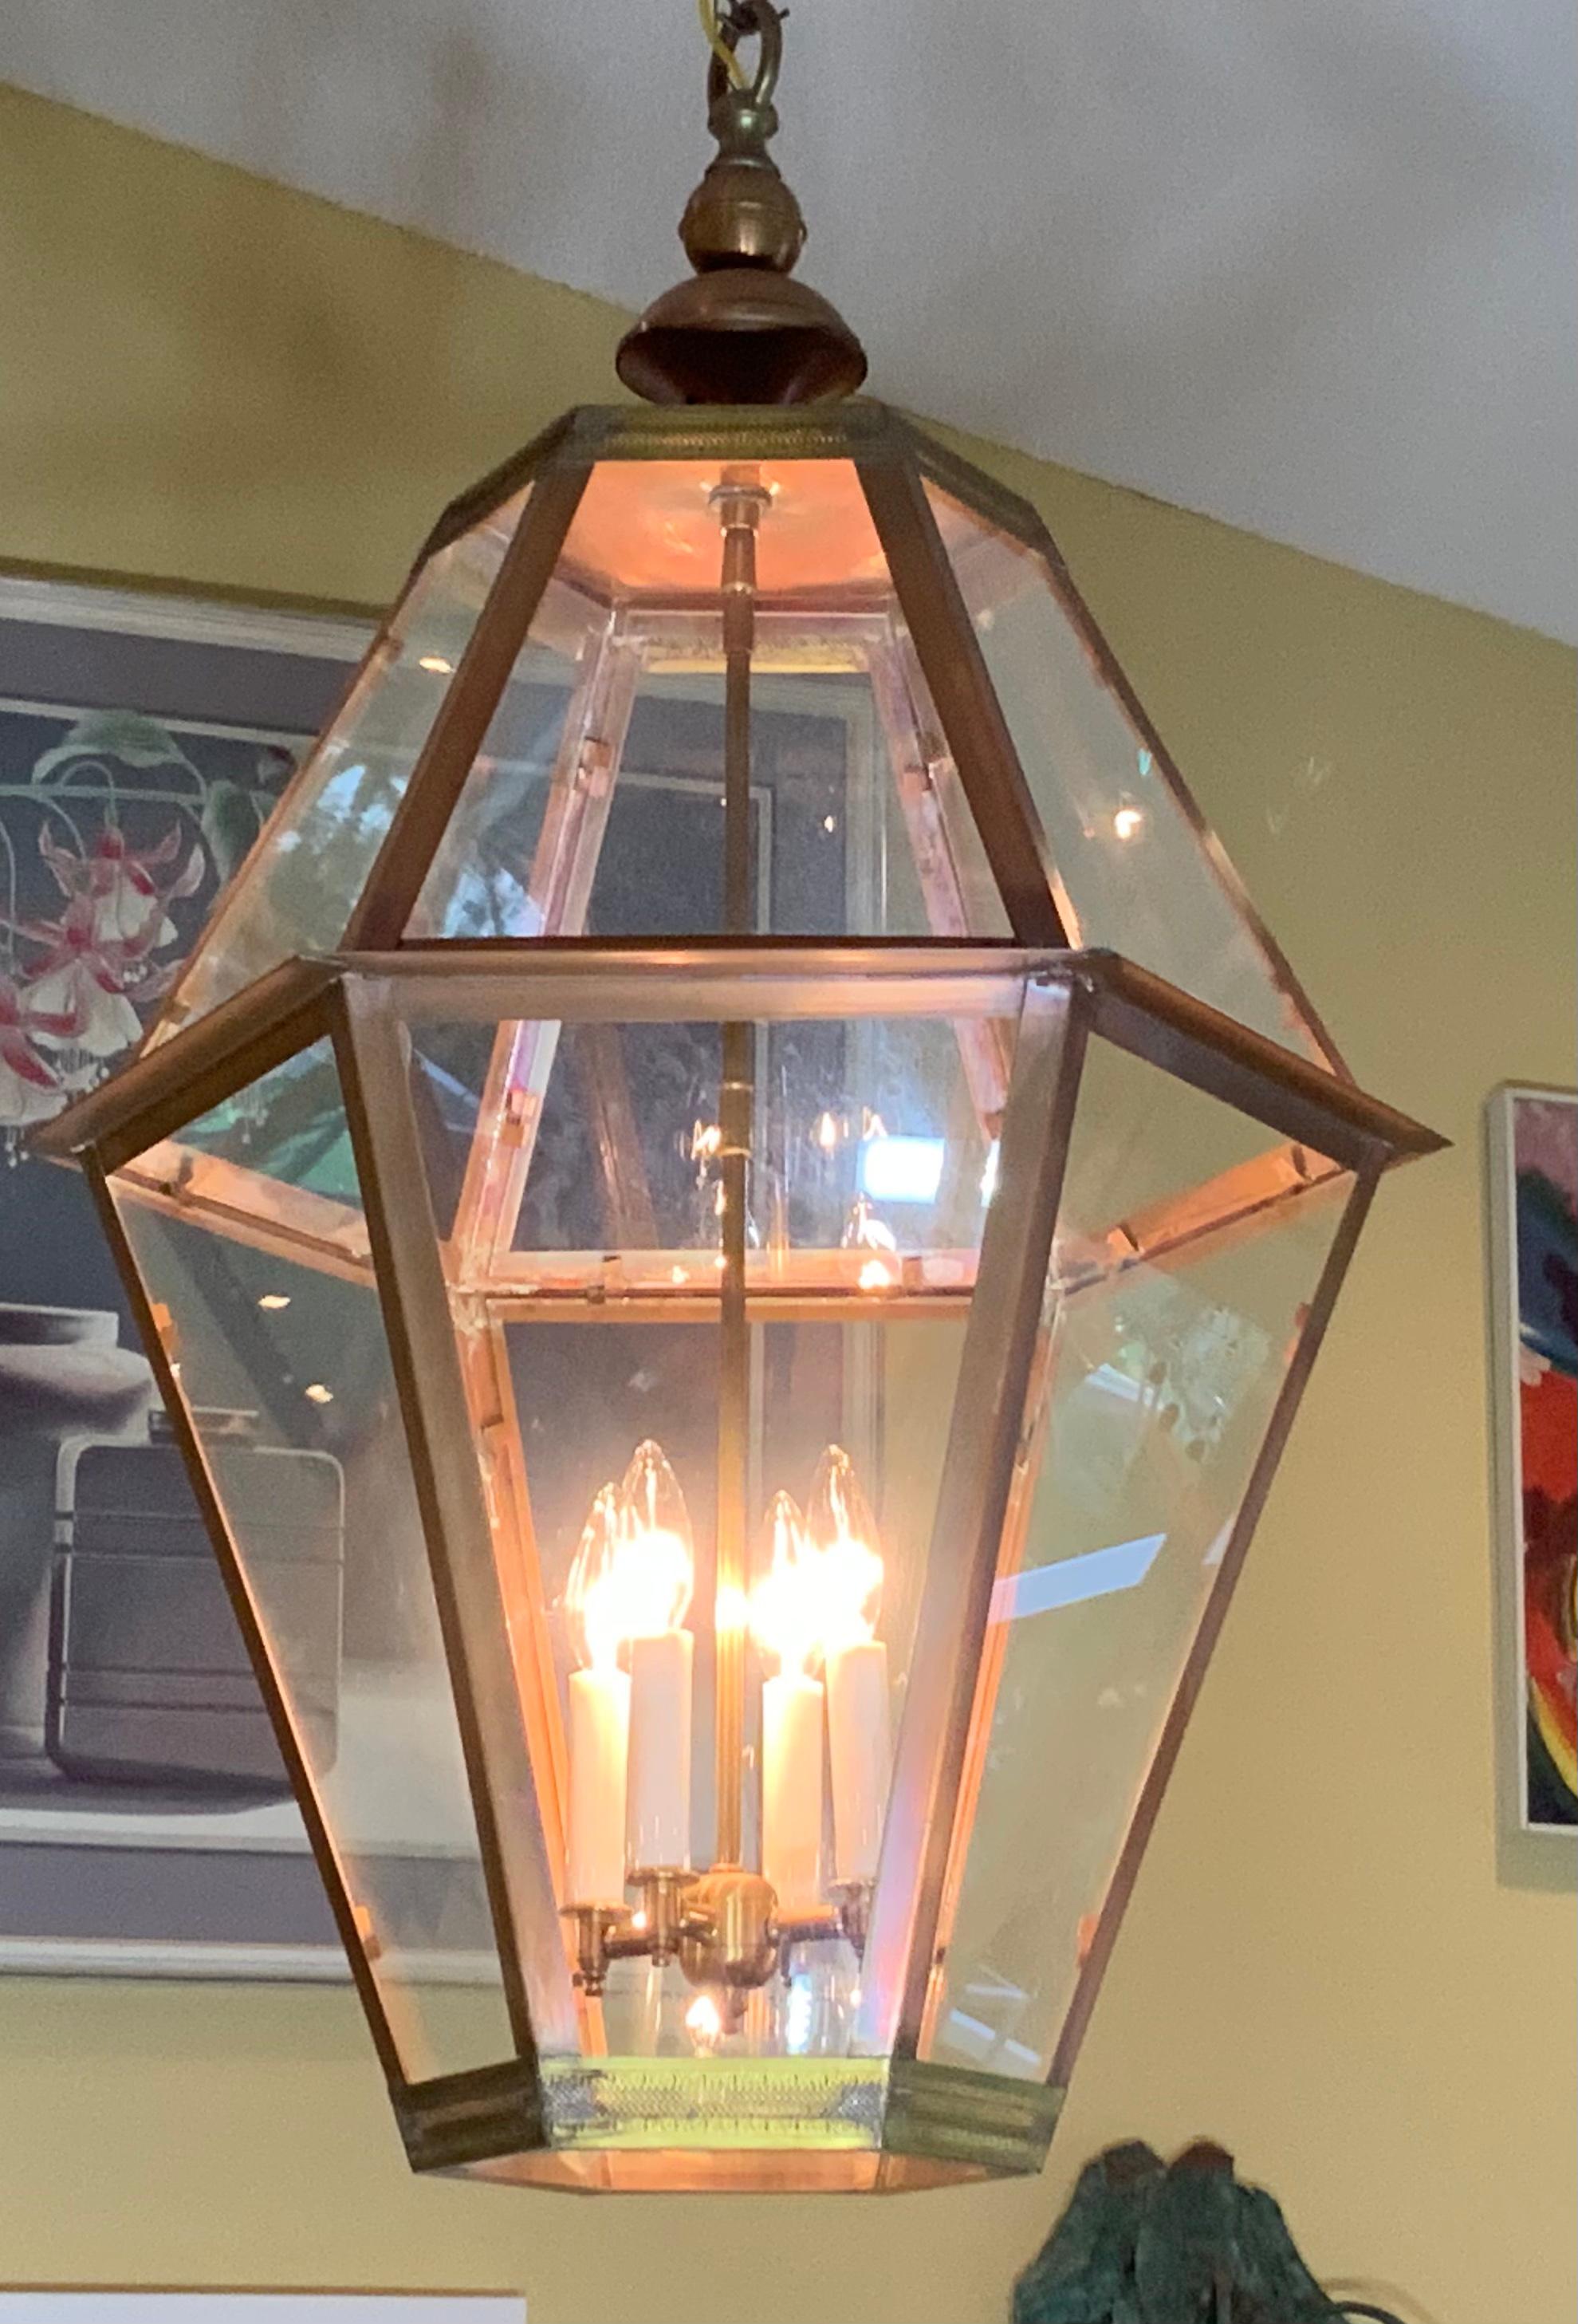 Exceptional six side custom made hanging lantern made of handcrafted solid copper and brass stem with four 60/watt lights, suitable for wet location
Up to US code, UL approved, great look indoor outdoor. Copper canopy and chain included. Measures: